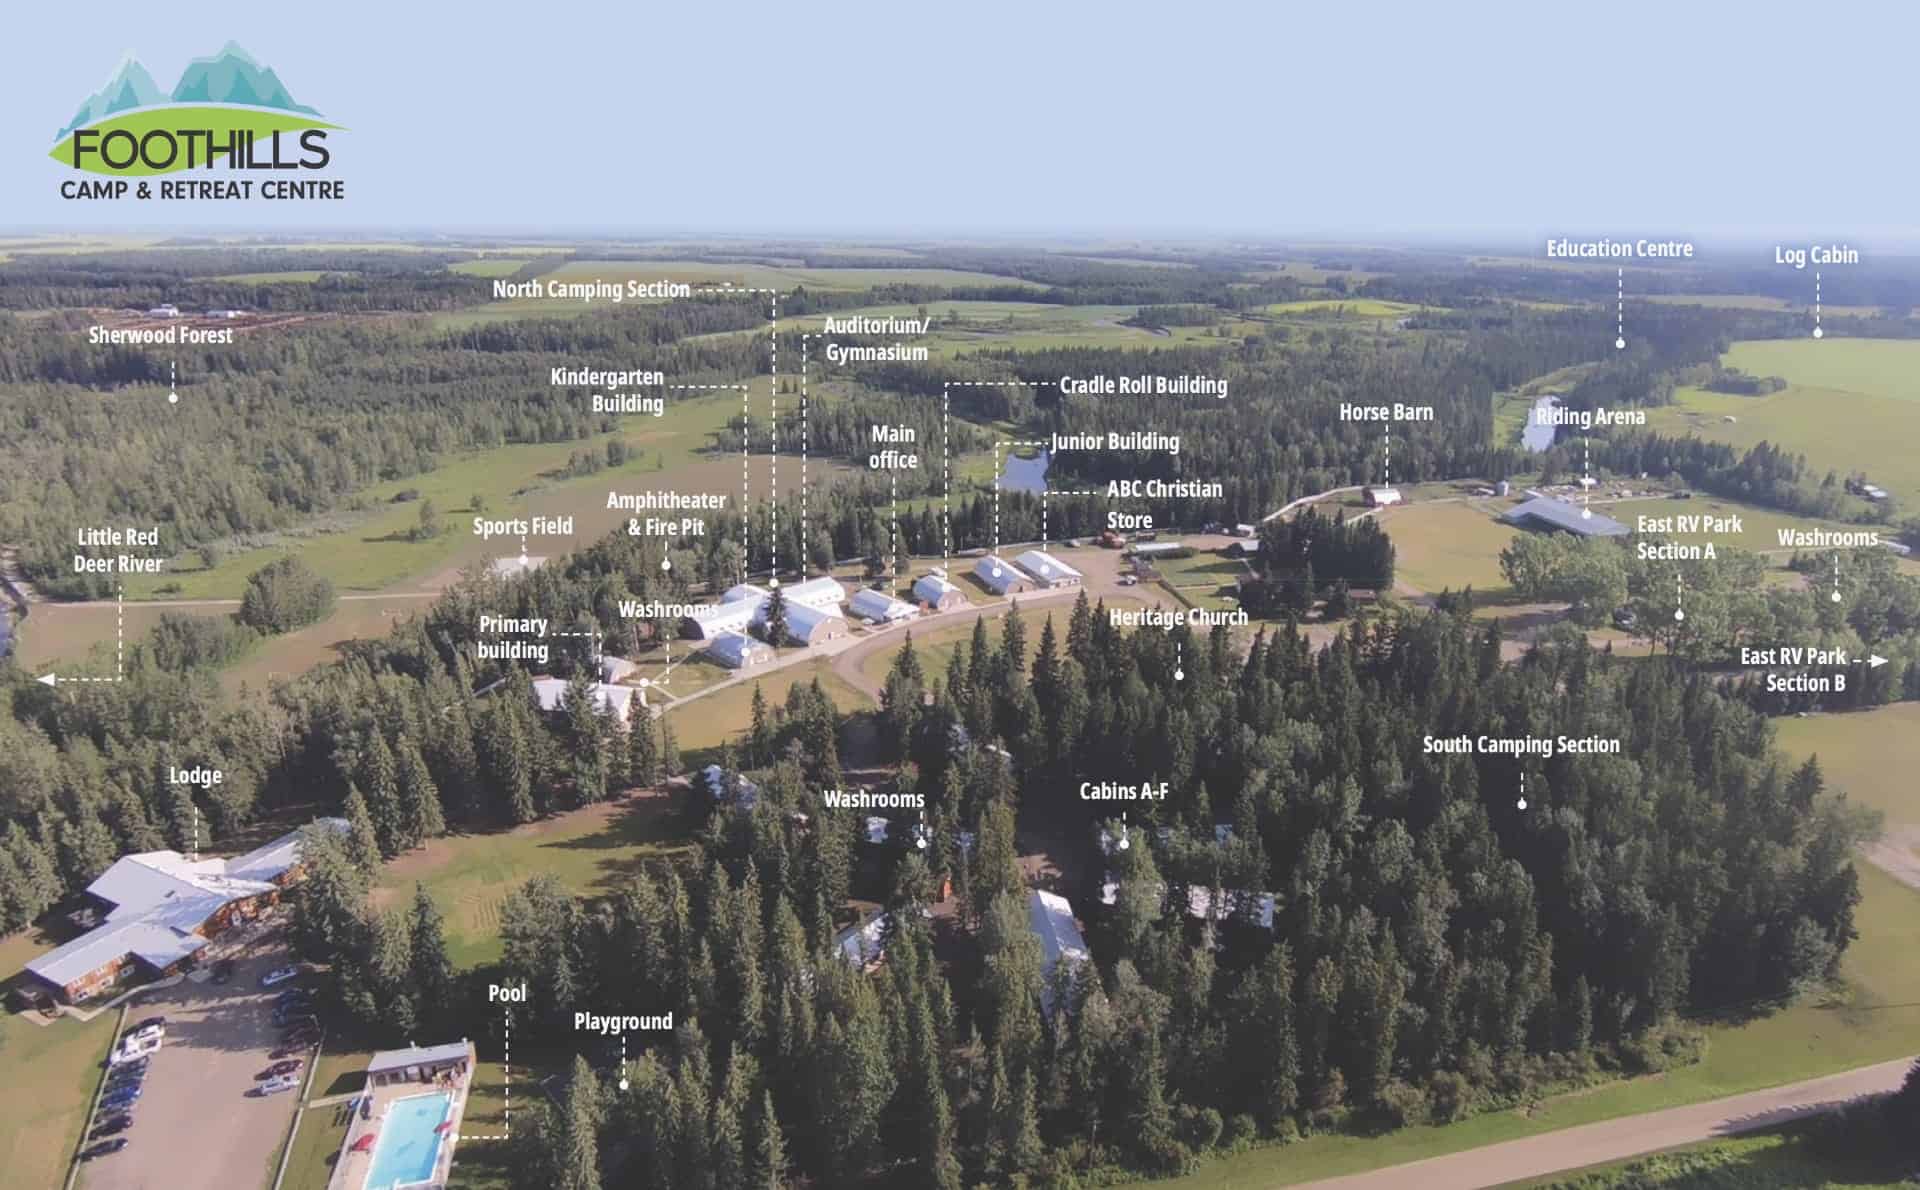 Foothills Camp Aerial View